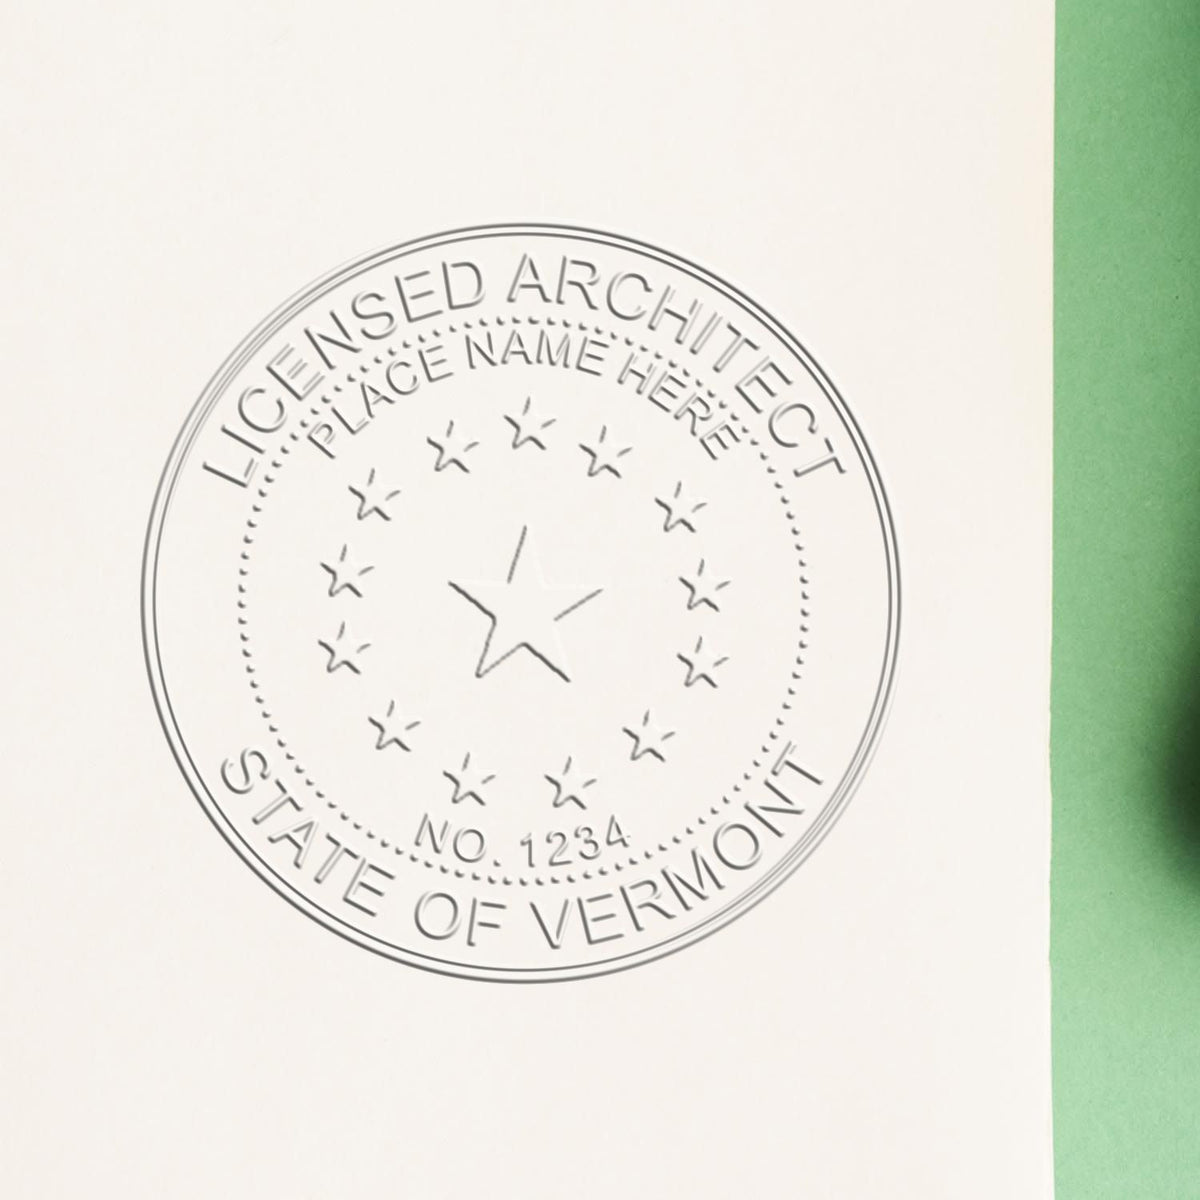 A photograph of the Hybrid Vermont Architect Seal stamp impression reveals a vivid, professional image of the on paper.